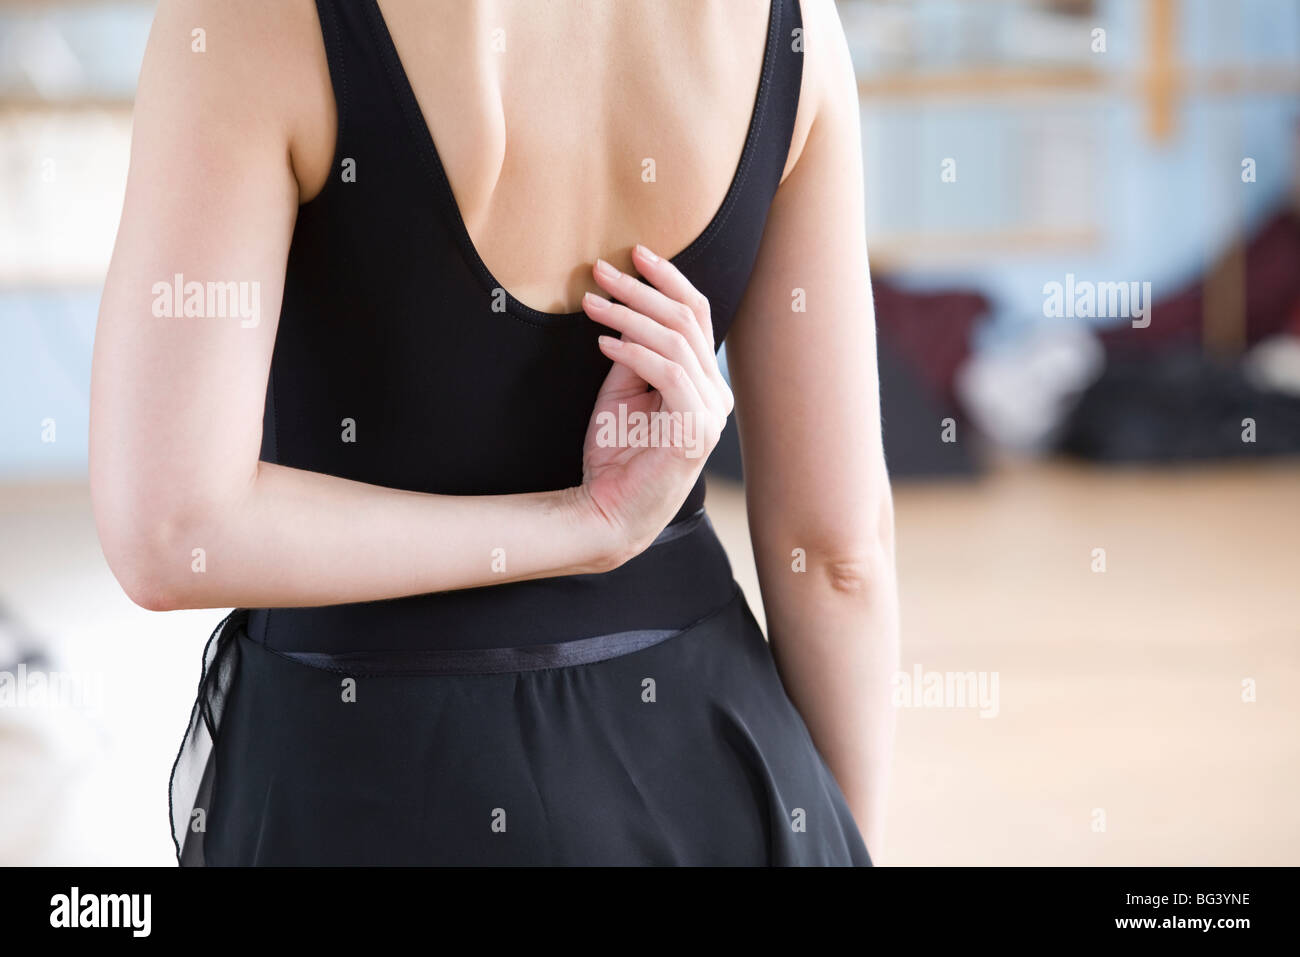 Young woman stretches in ballet rehearsal Stock Photo